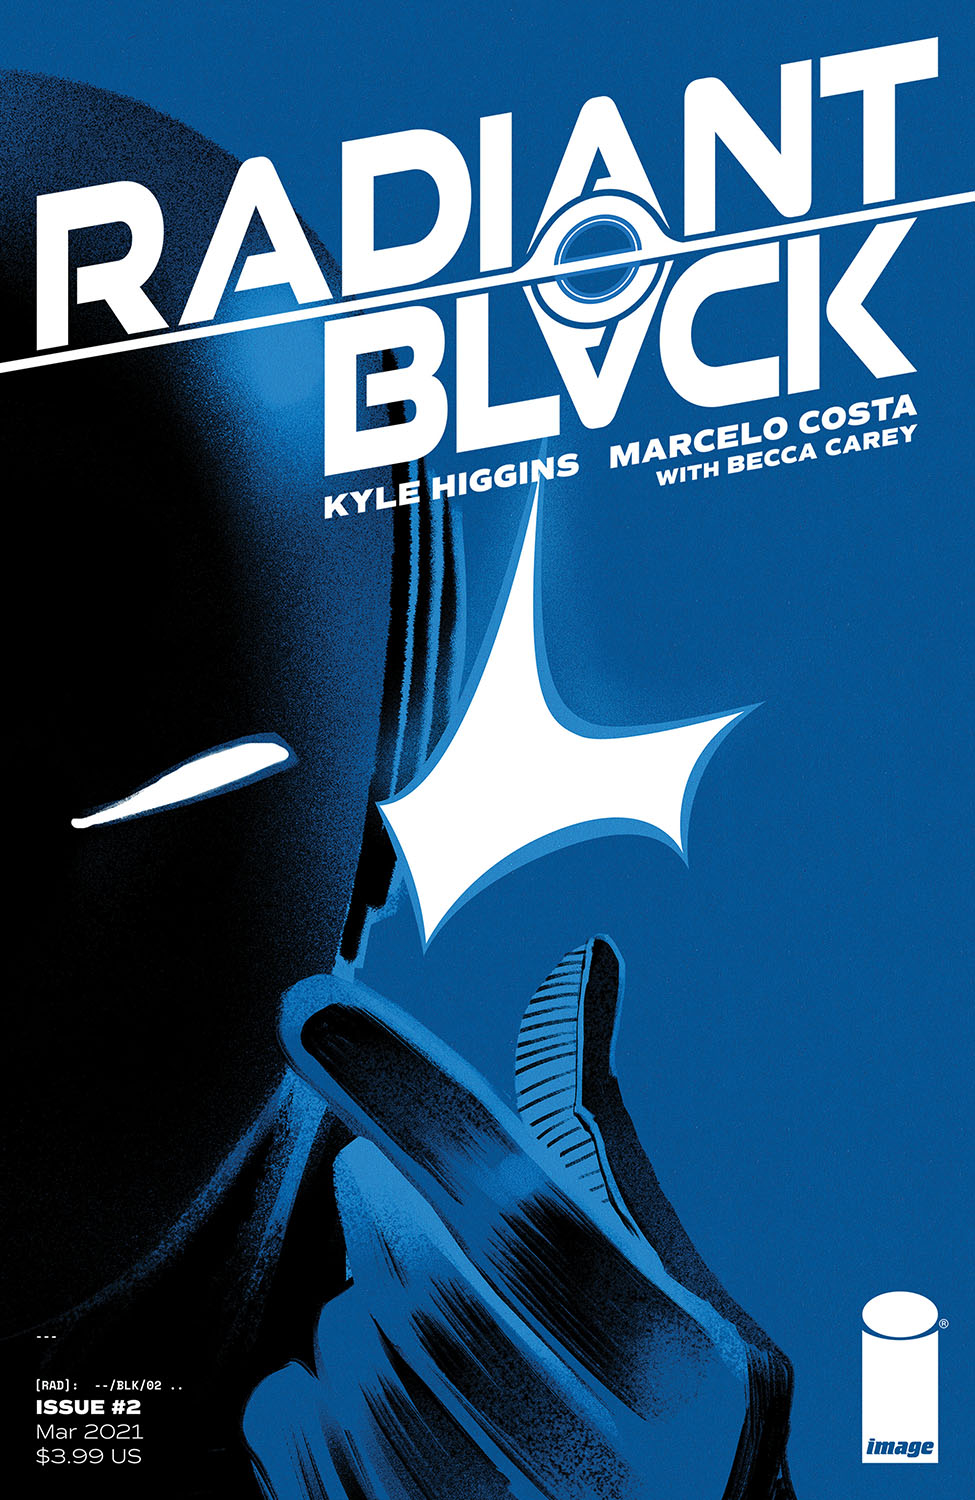 Radiant Black #2 Cover A Costa